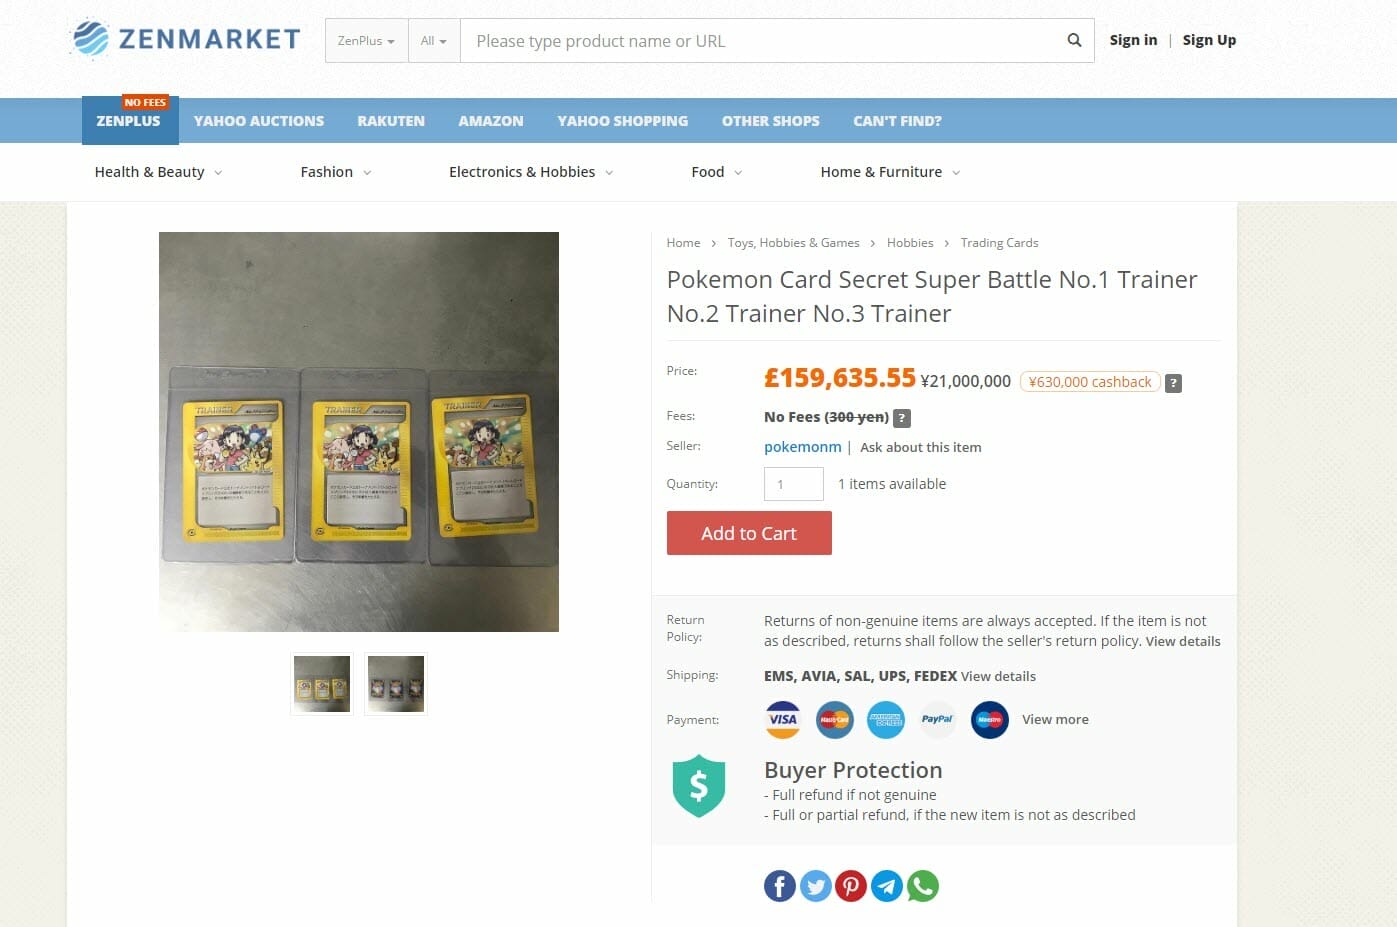 £160,000 for a Pokemon card